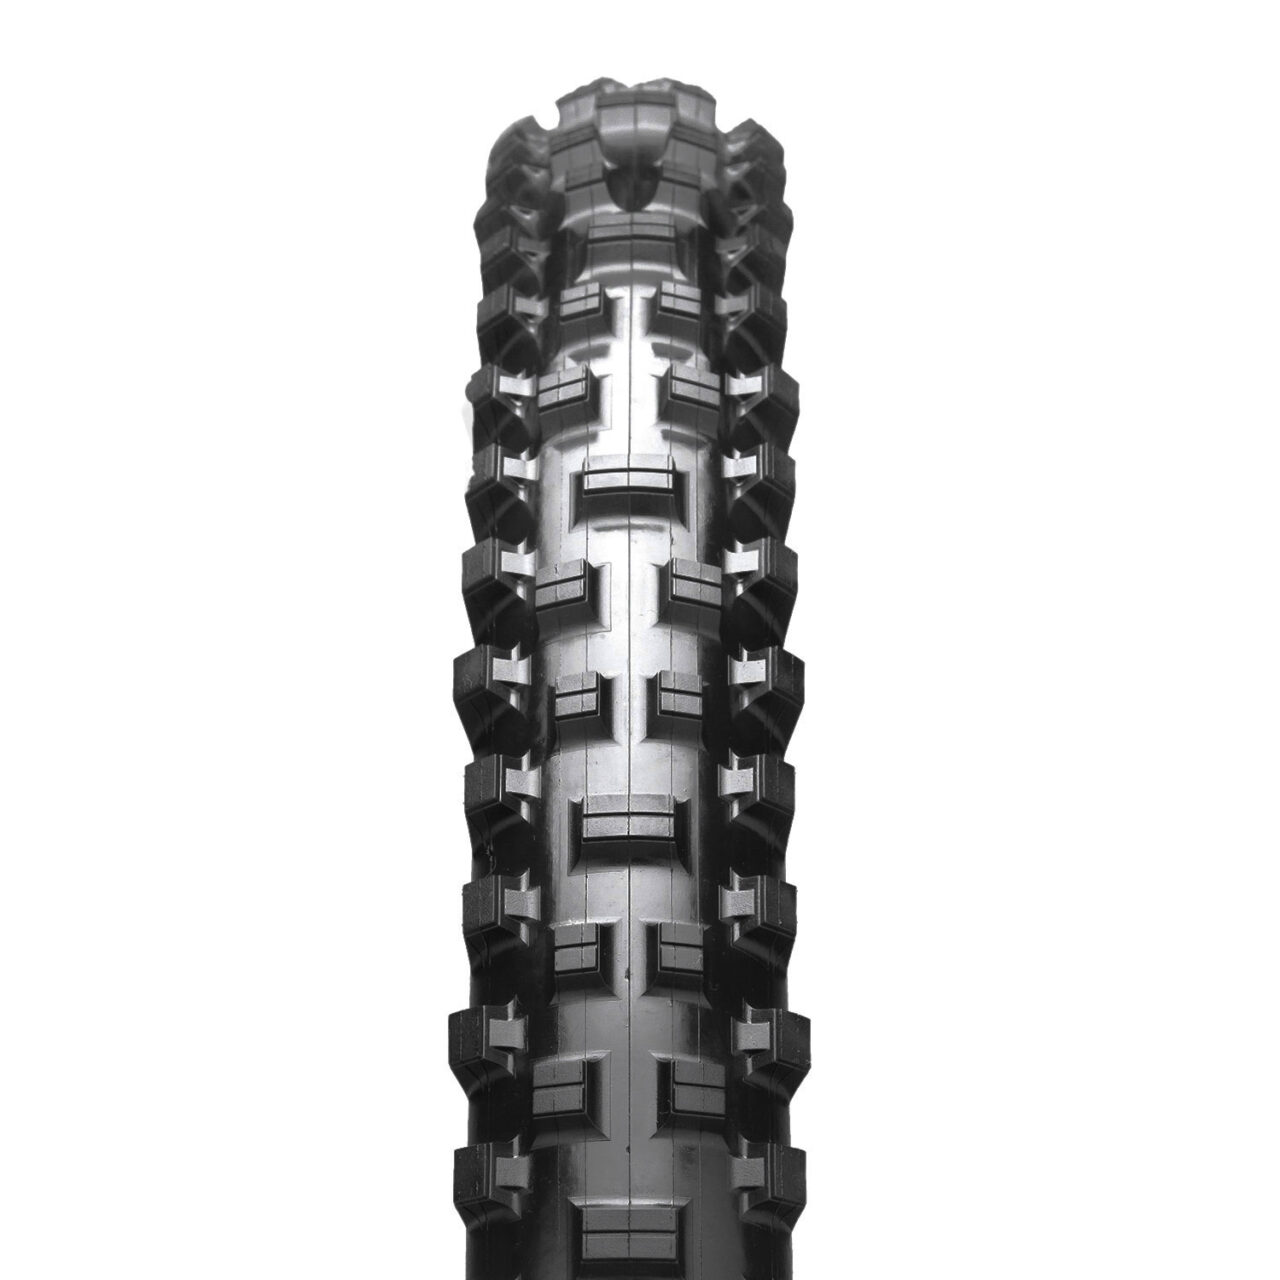 Maxxis Shorty Gen1 bicycle tire tread